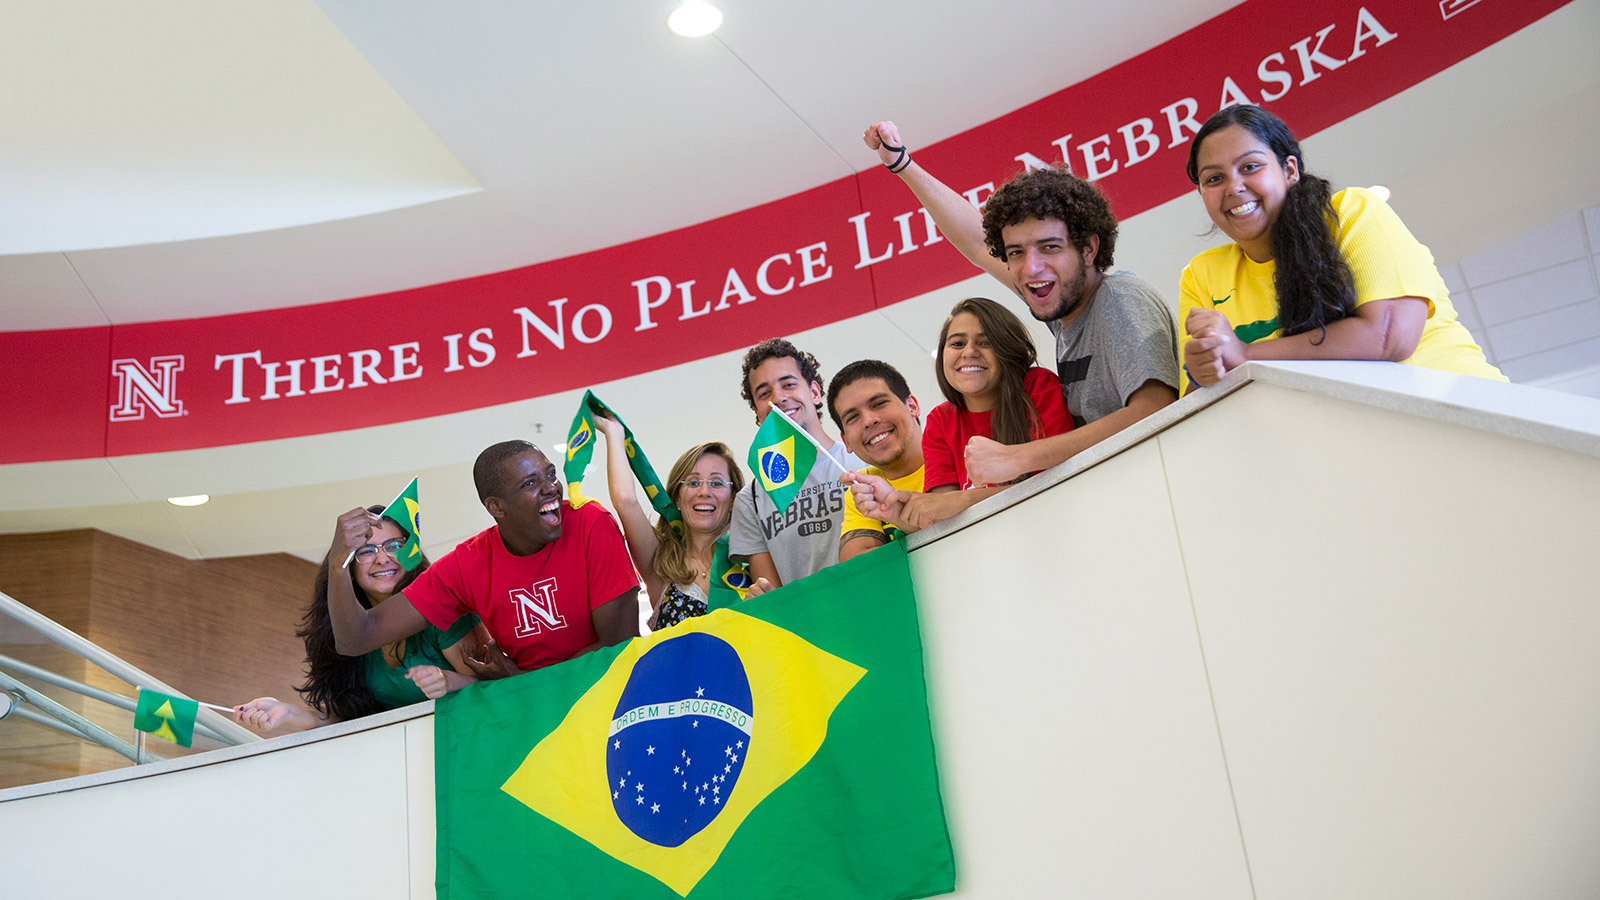 Brazilian students cheer in front of banner.